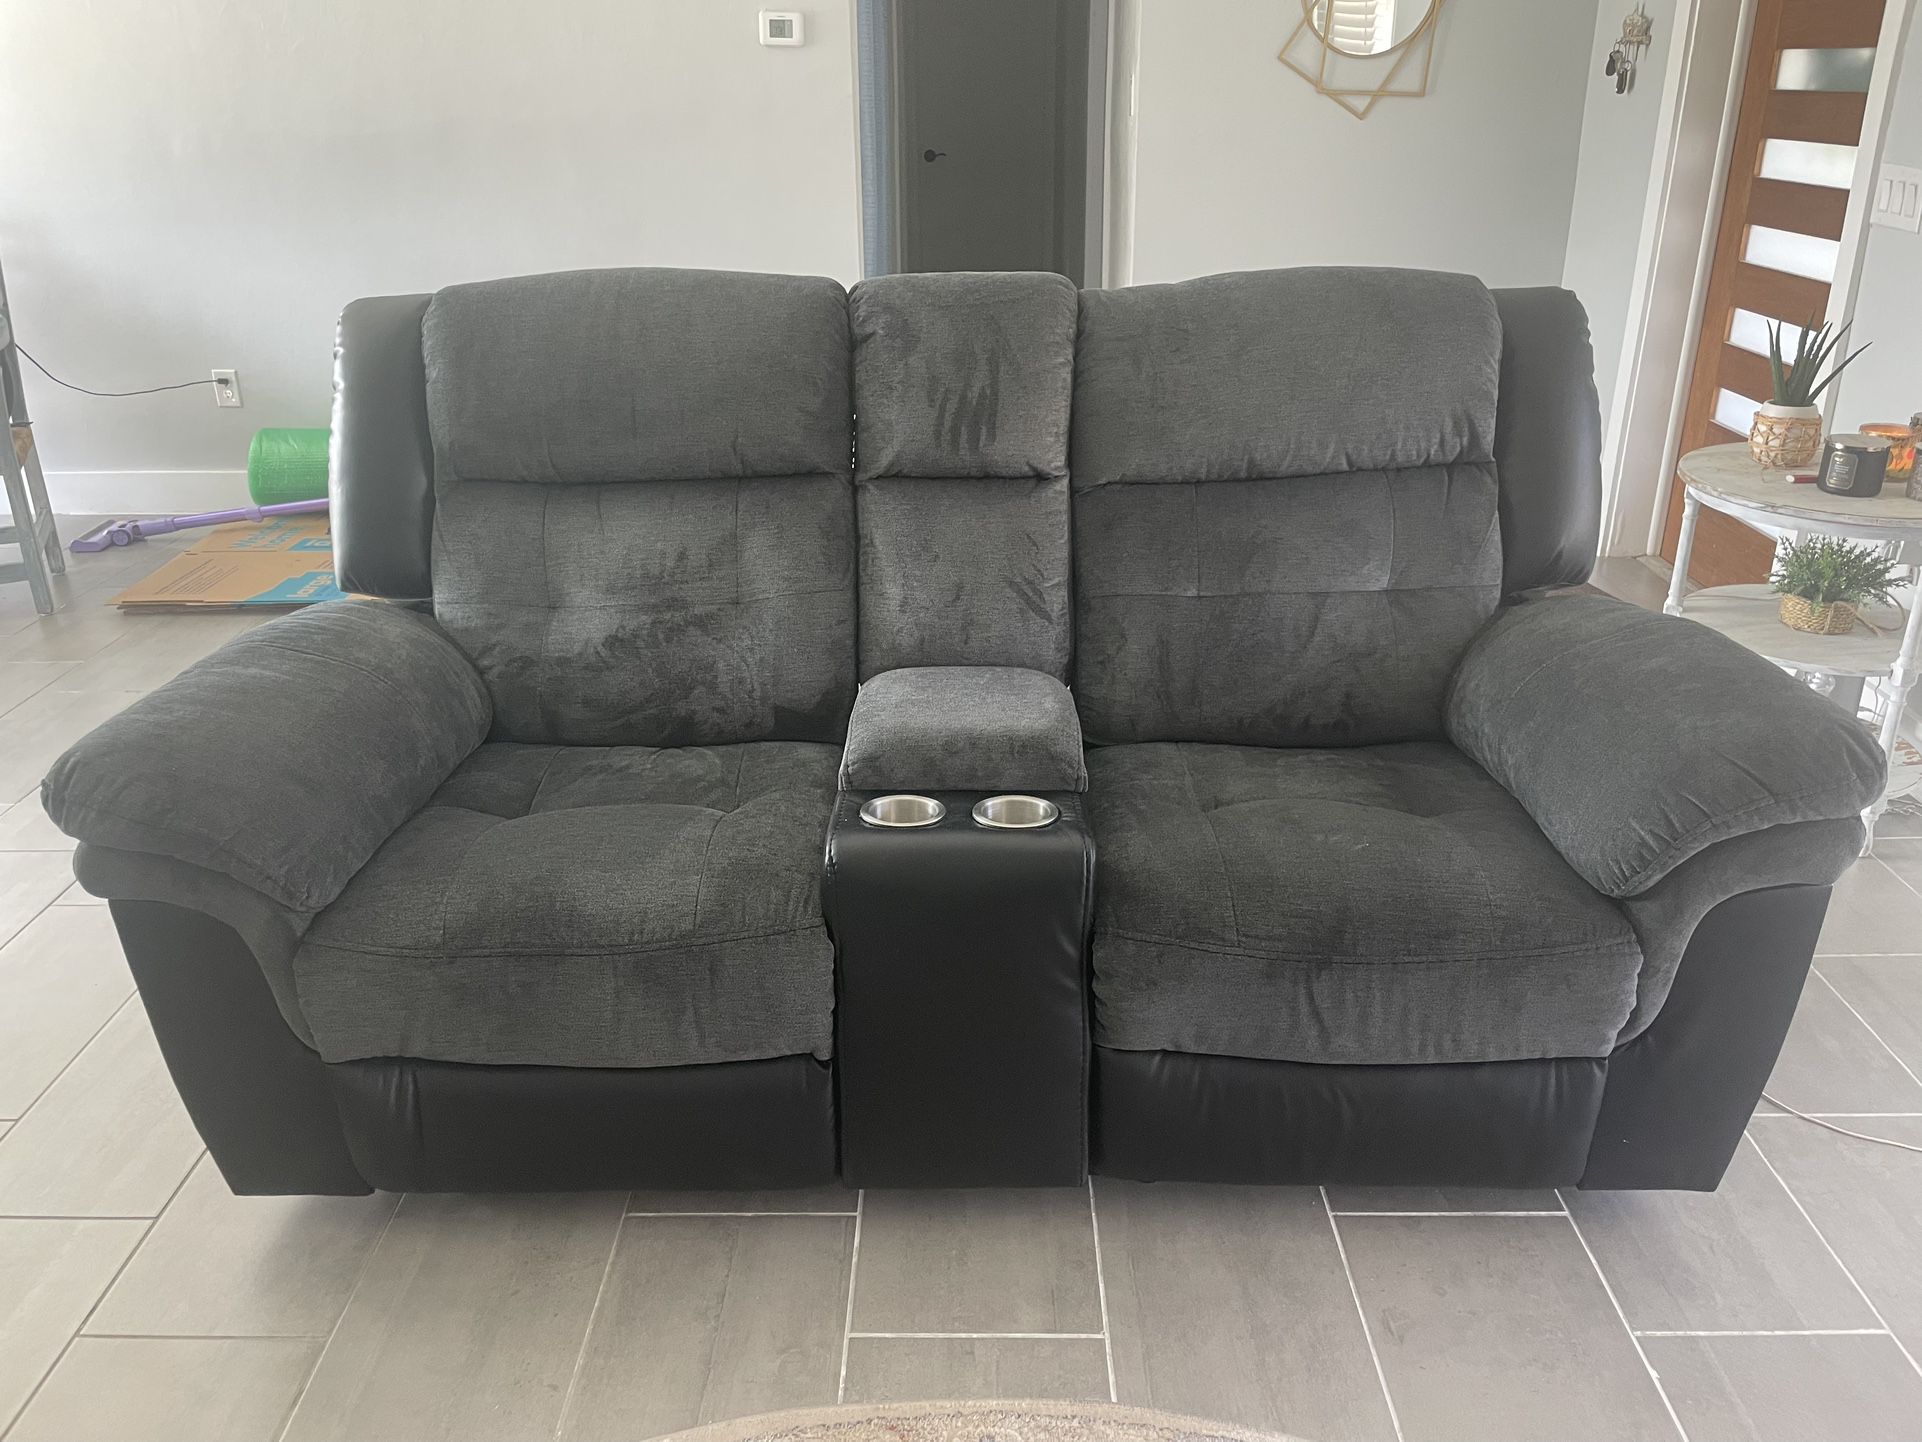 Grey Fabric/leather Recliner Love Seat 